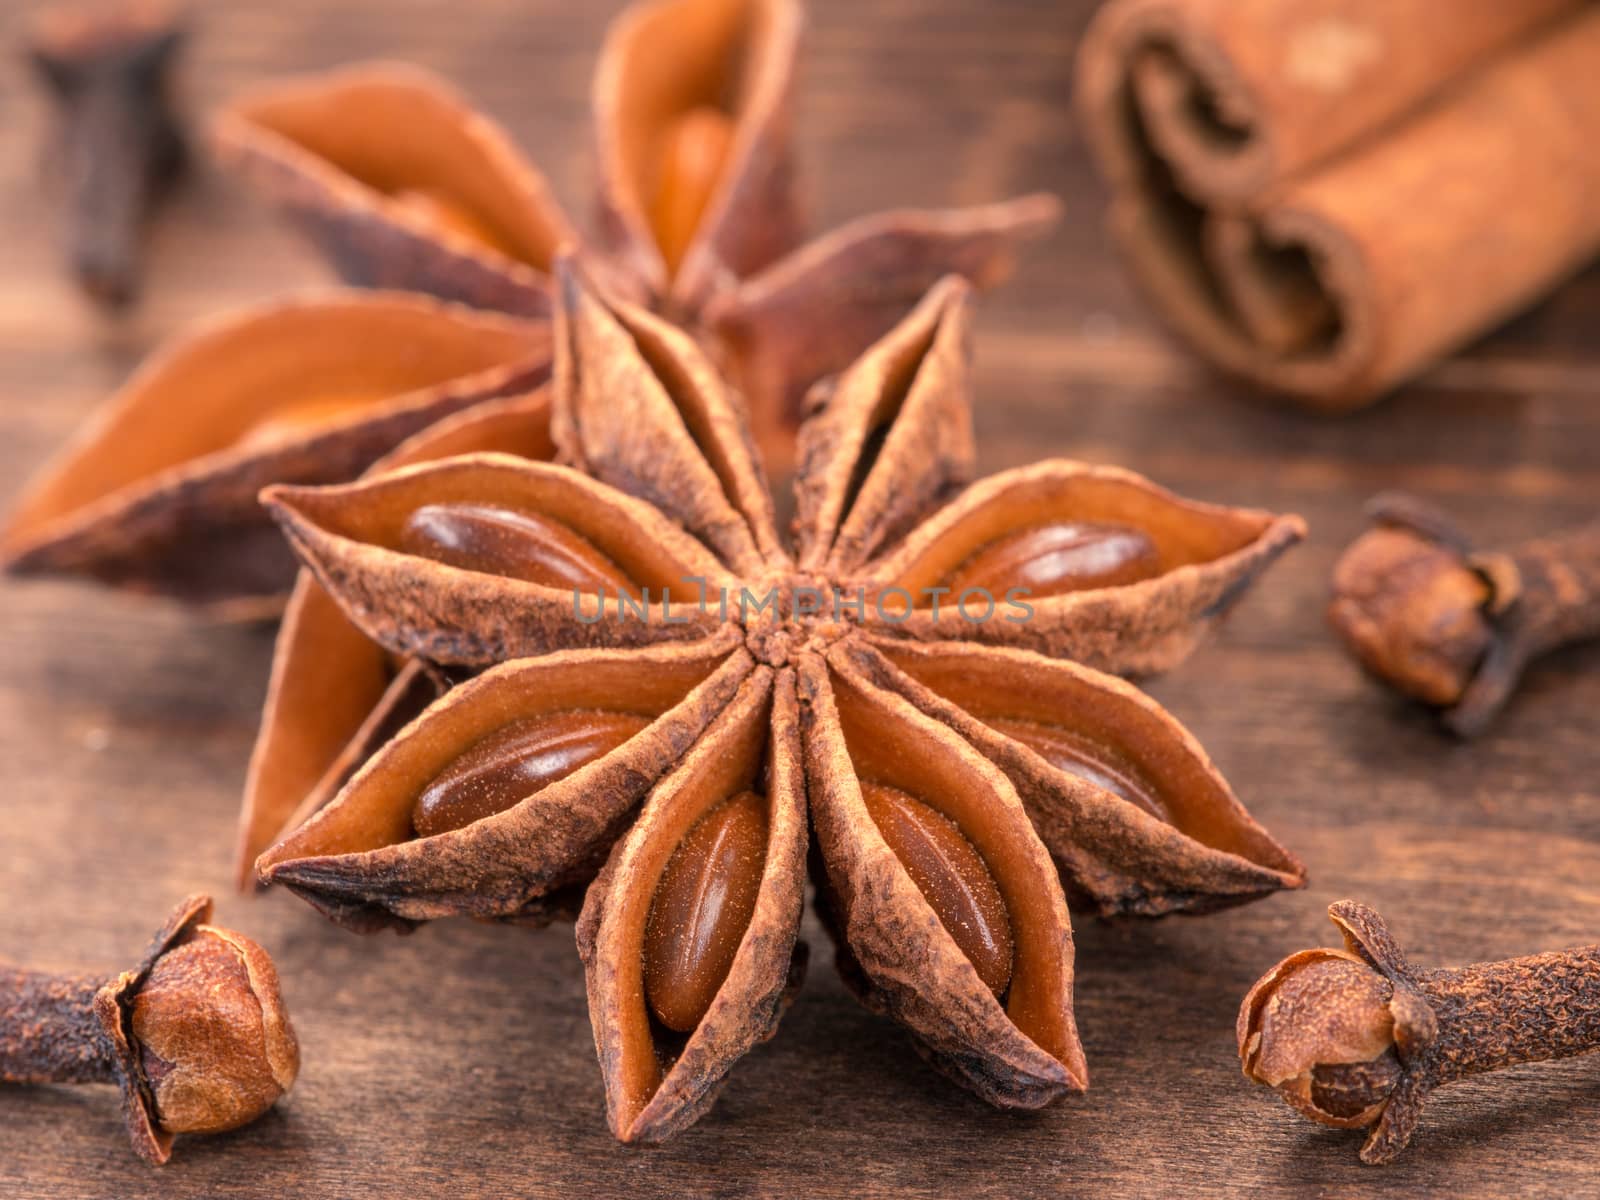 star anise on wooden background close up. Blurred clove and cinnamon sticks as background